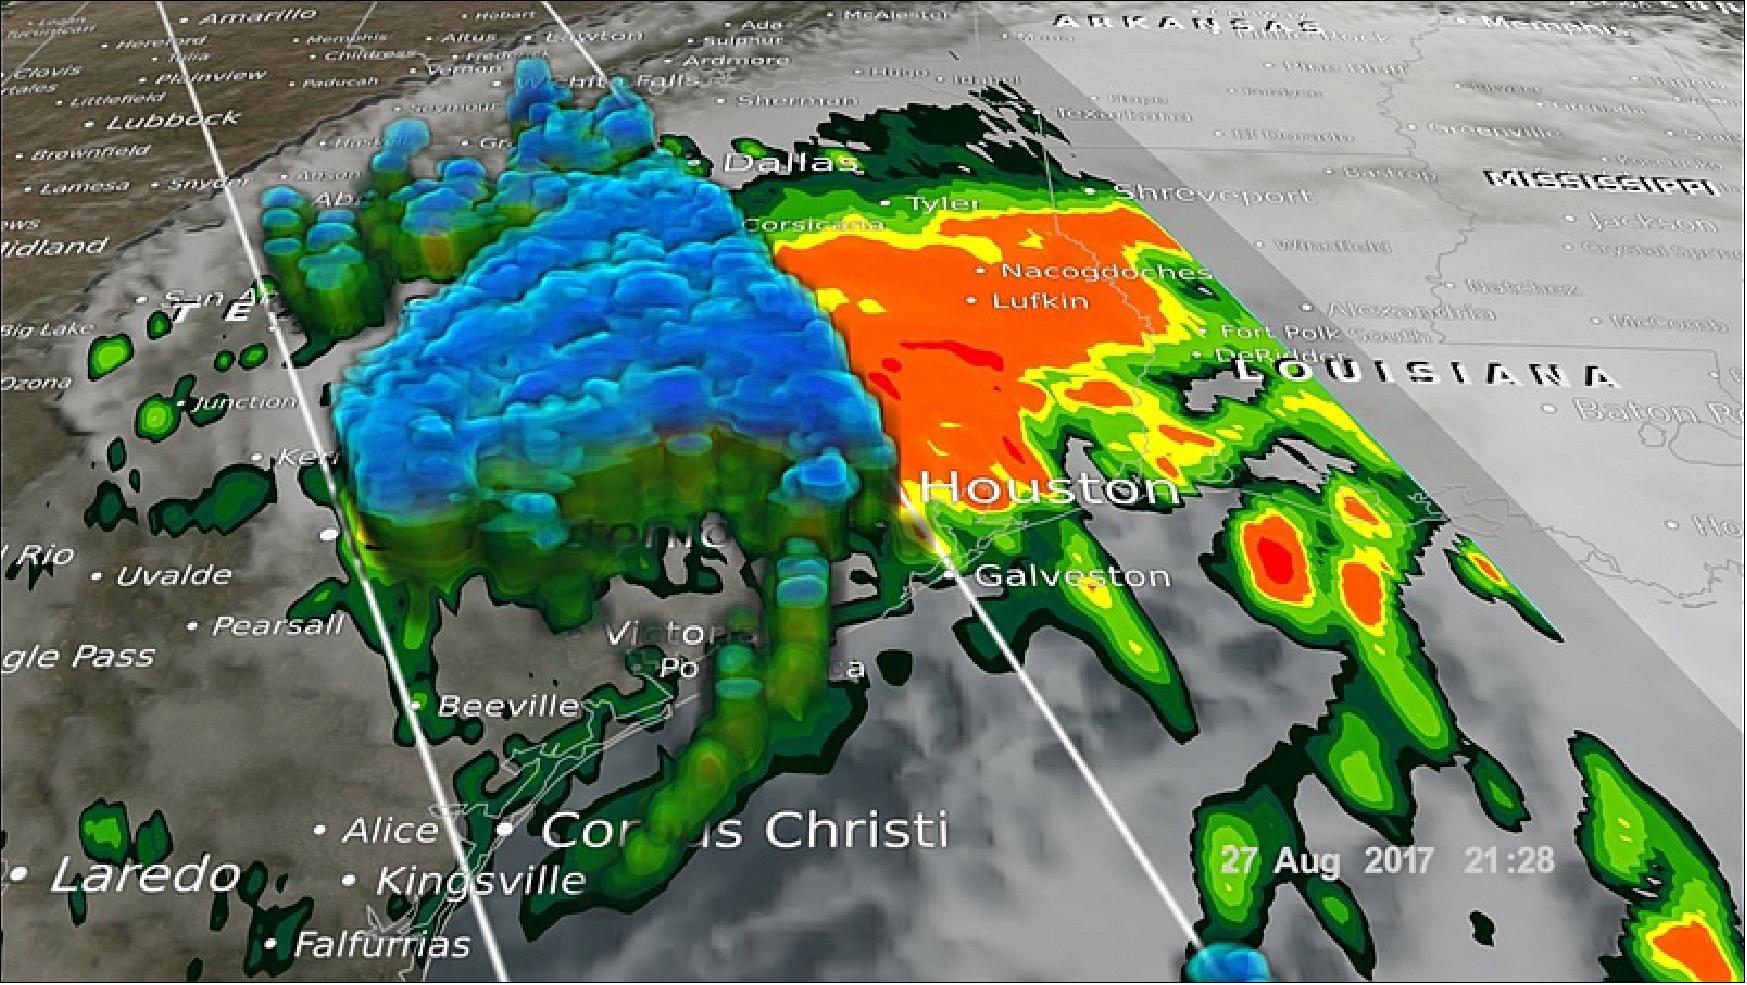 Figure 44: NASA's GPM Core Observatory captured these images of Hurricane Harvey at 6:45 a.m. CDT (1145 UTC) and 4:25 p.m. CDT (2125 UTC) on August 27, nearly two days after the storm made landfall near Victoria, Texas. The image shows rain rates derived from GPM's GMI microwave imager (outer swath) and dual-frequency precipitation radar or DPR (inner swath) overlaid on enhanced infrared data from NOAA’s GOES East satellite (image credit: NASA Scientific Visualization Studio)